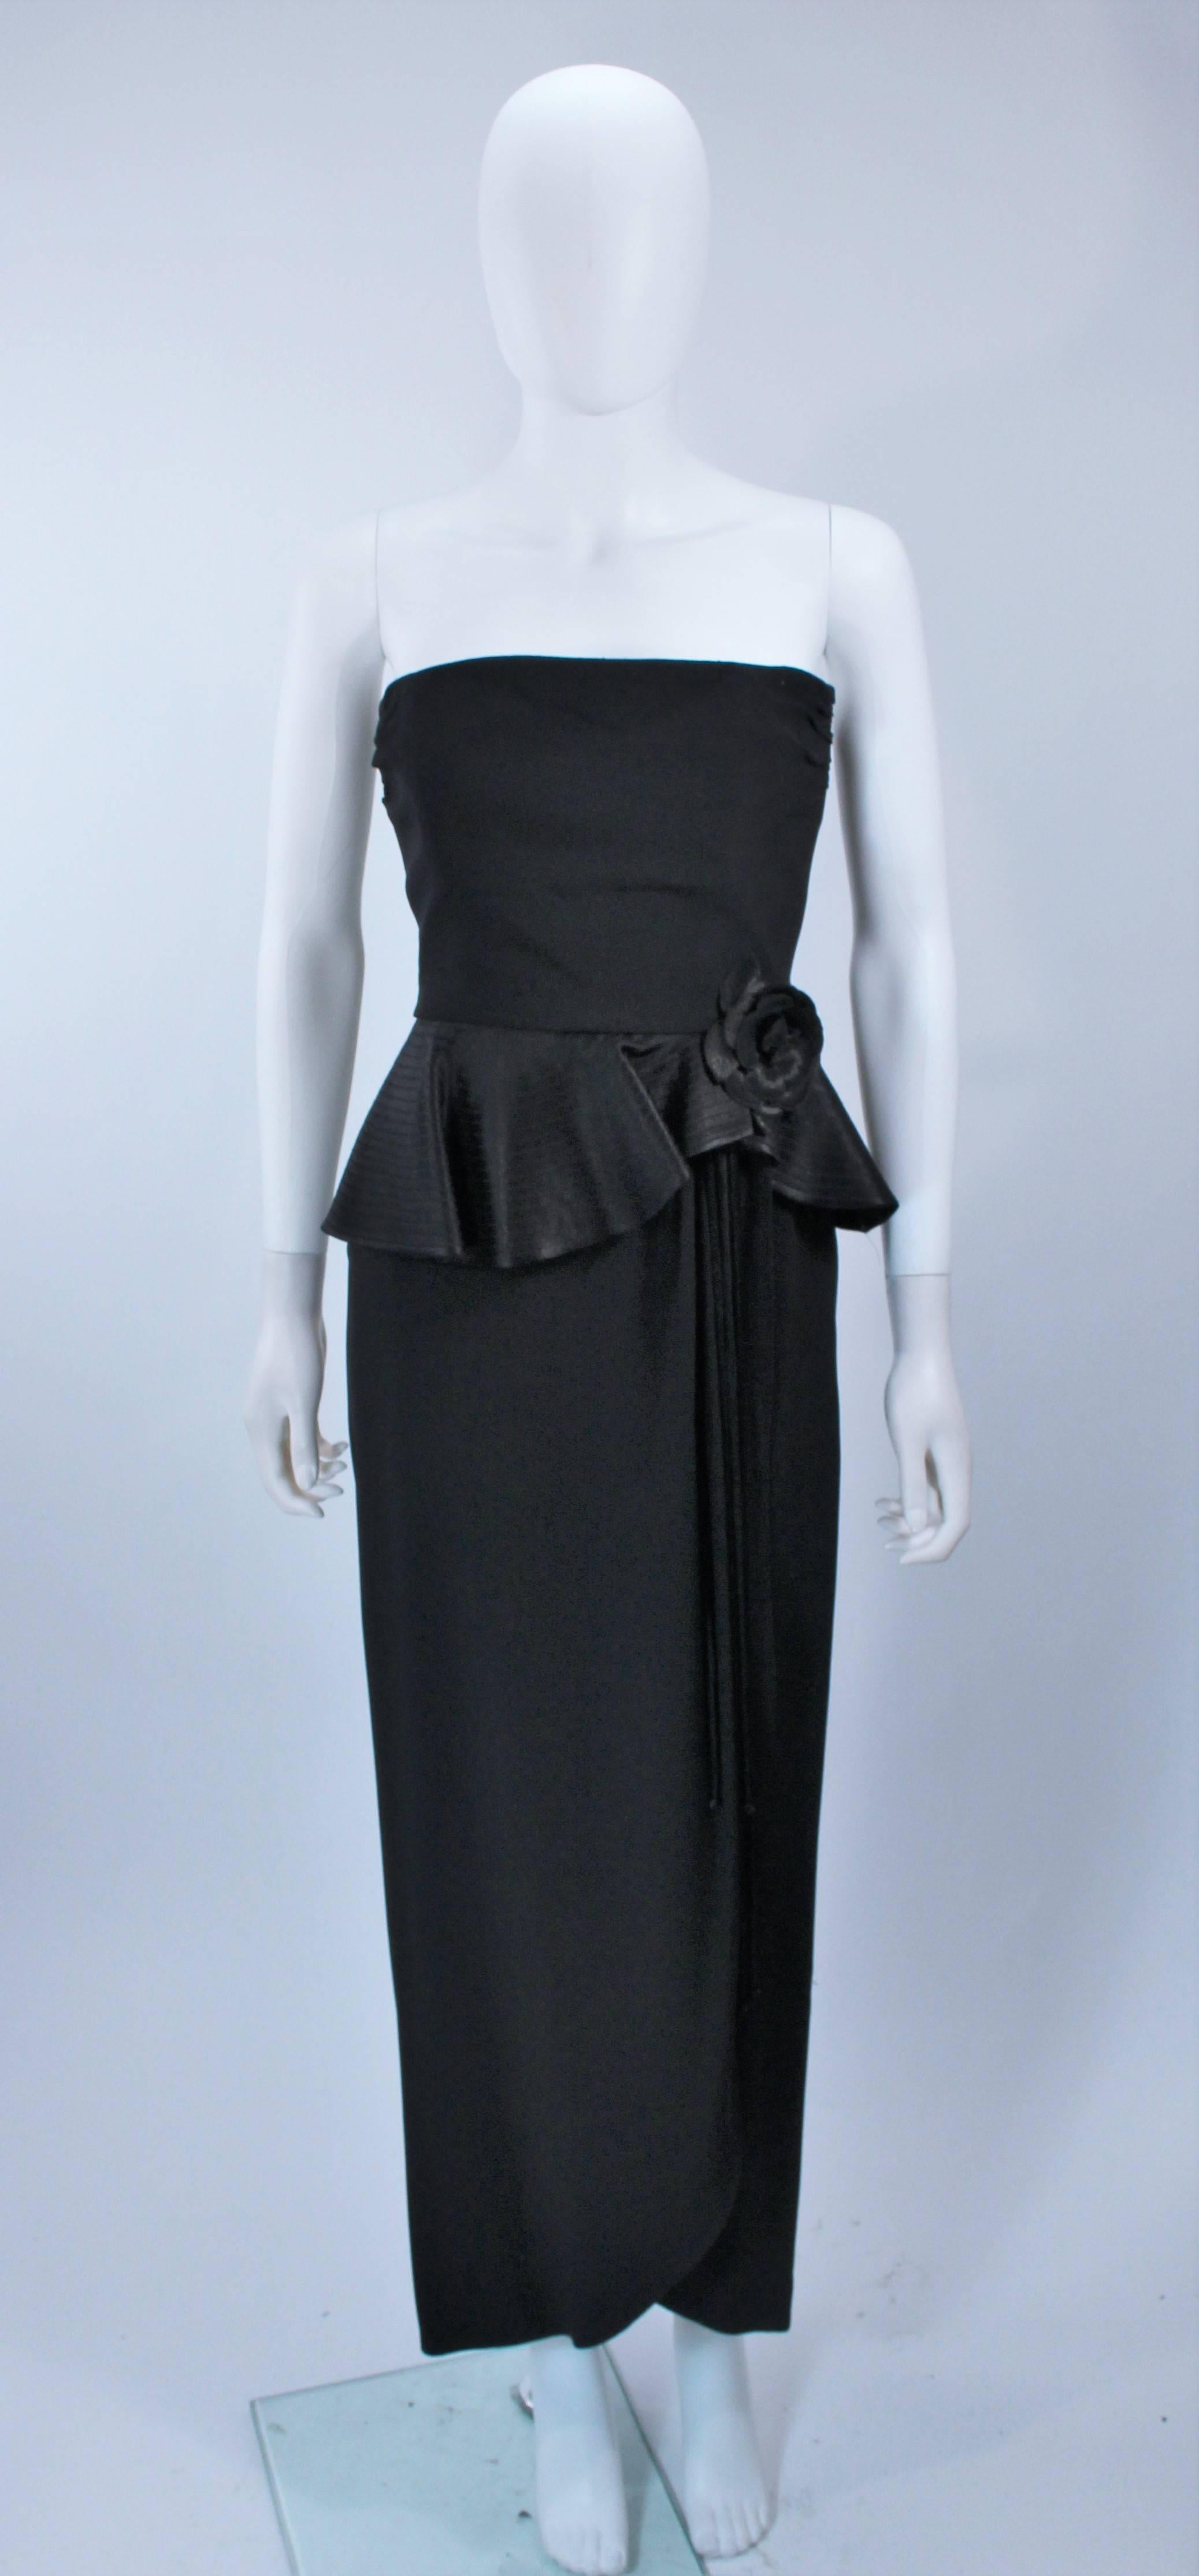  This Albert Nipon gown is composed of a black crepe textured fabric. Features a strapless design with top stitch satin peplum and draped rose detail There is a center back zipper closure and button accents. In excellent vintage condition. 

 